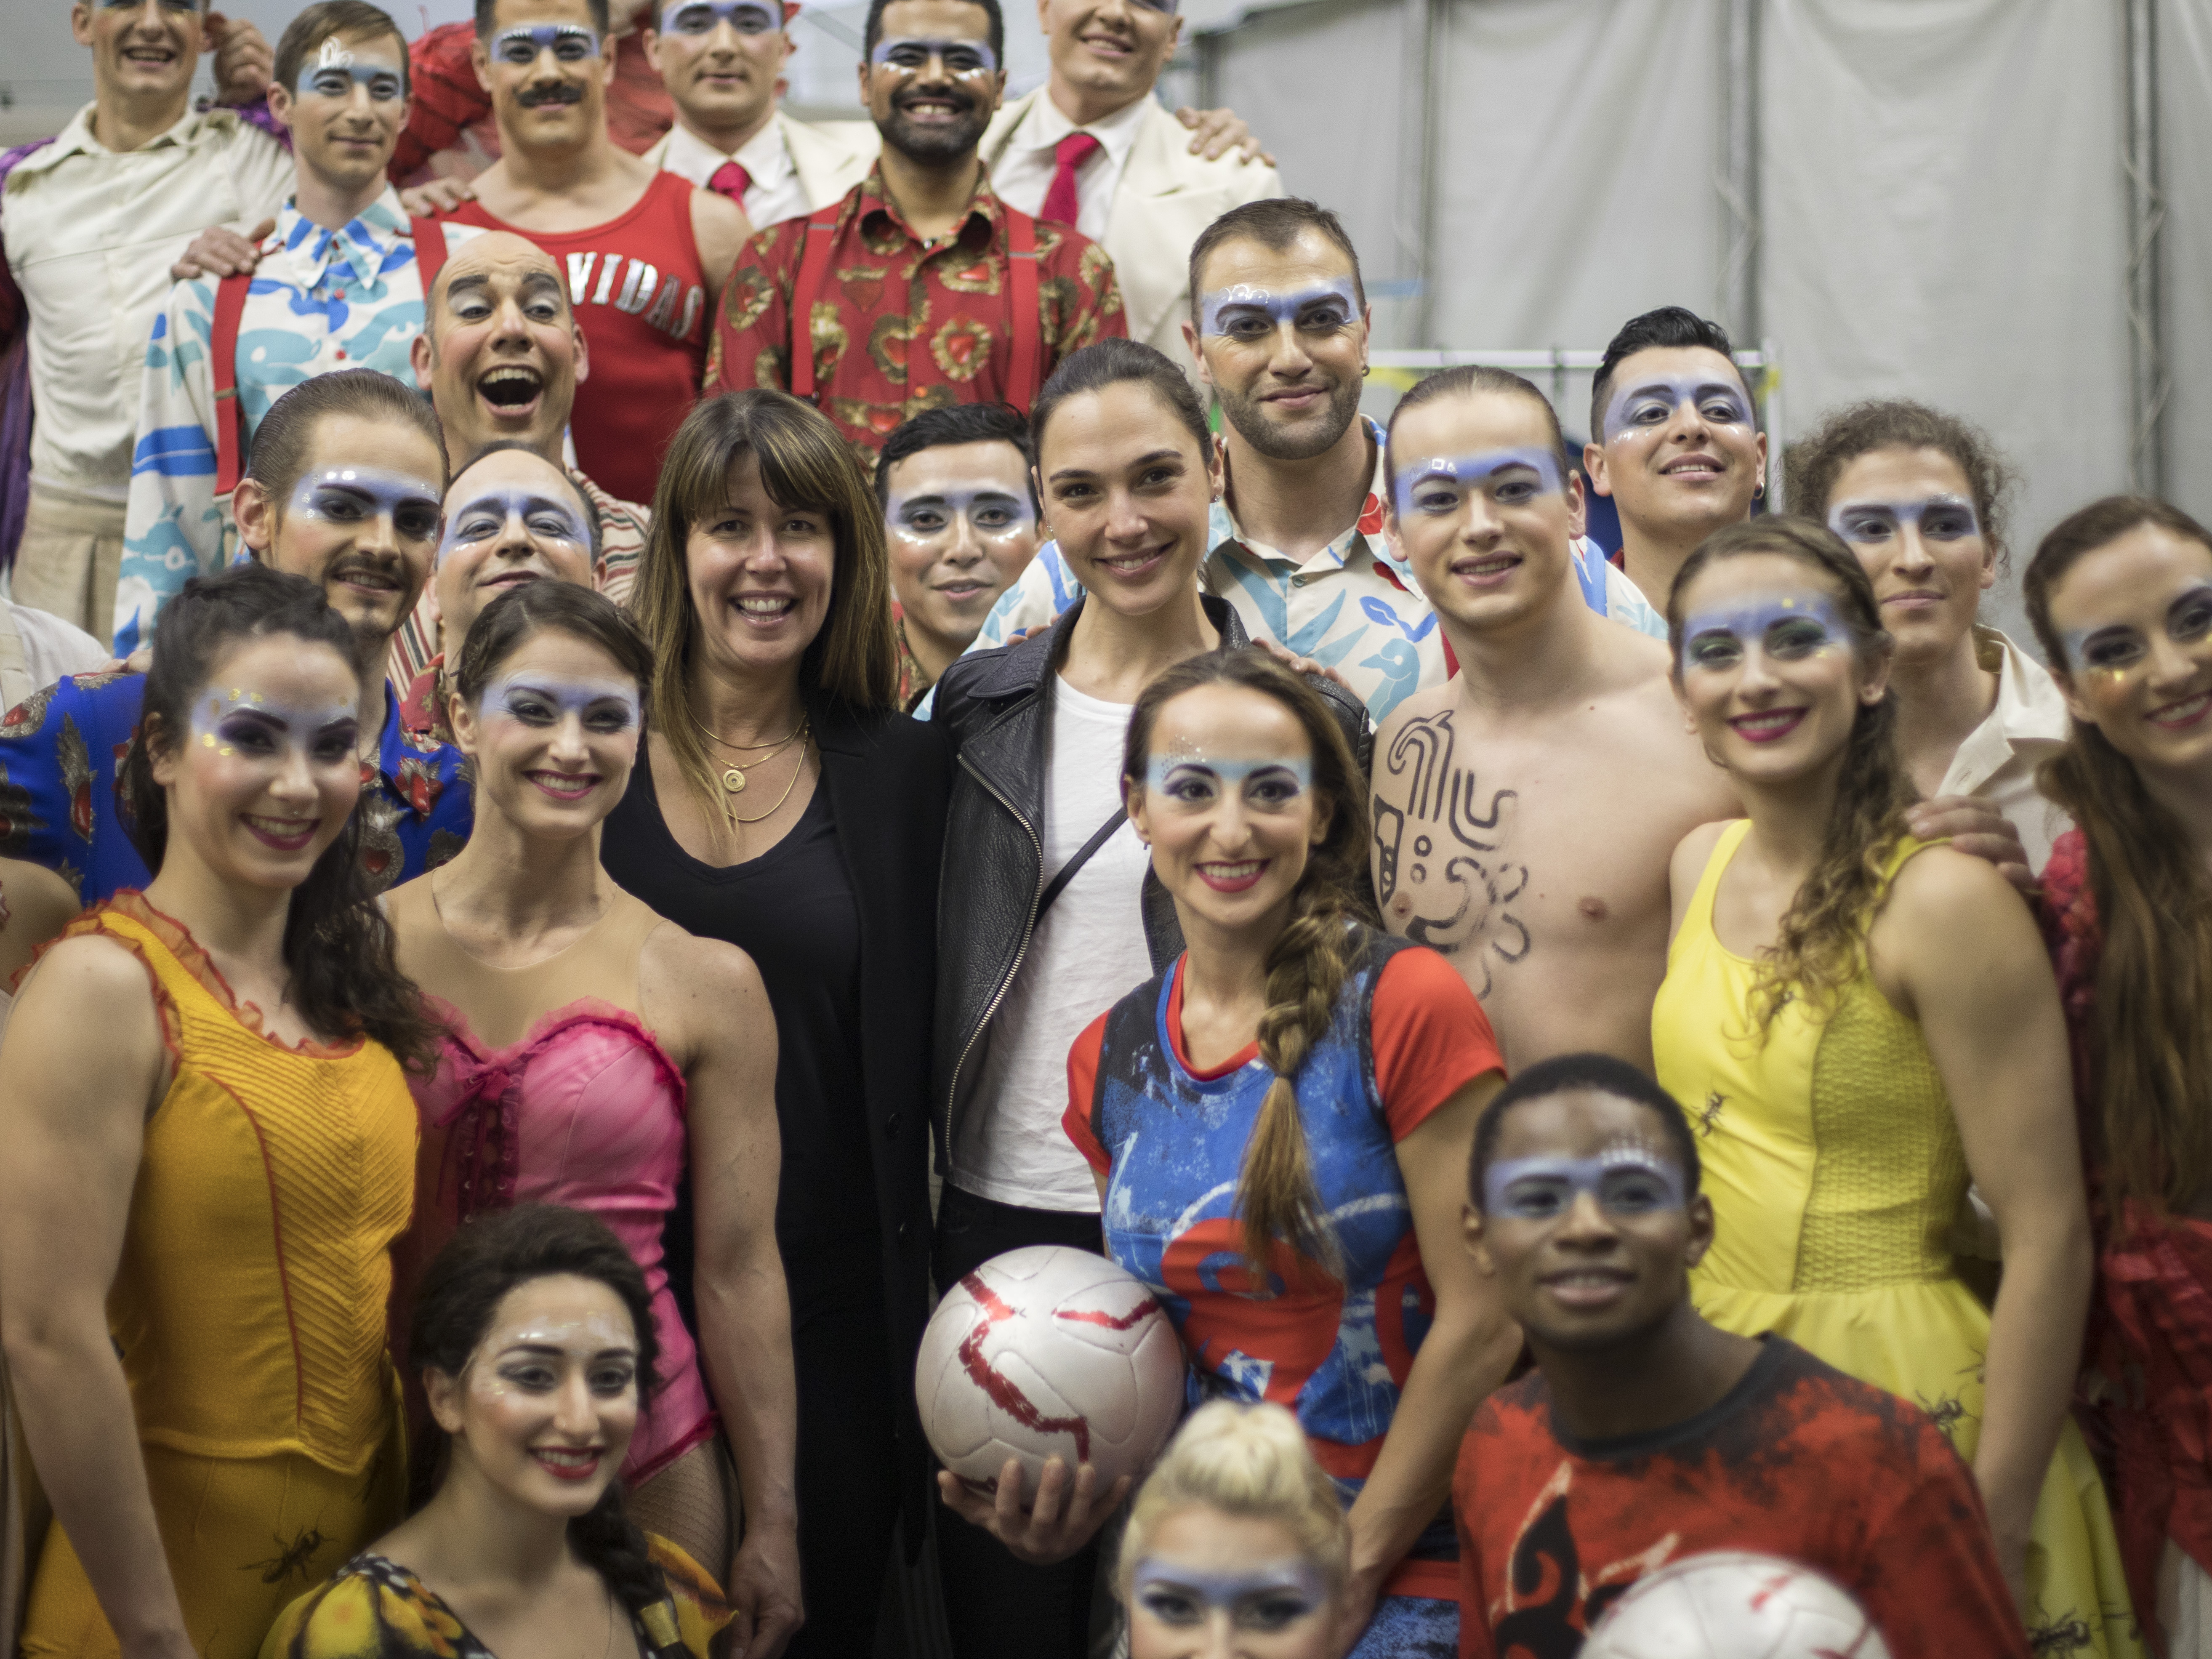 Gal Gadot, Patty Jenkins and Ty Burrell Visit The Cast of Cirque du